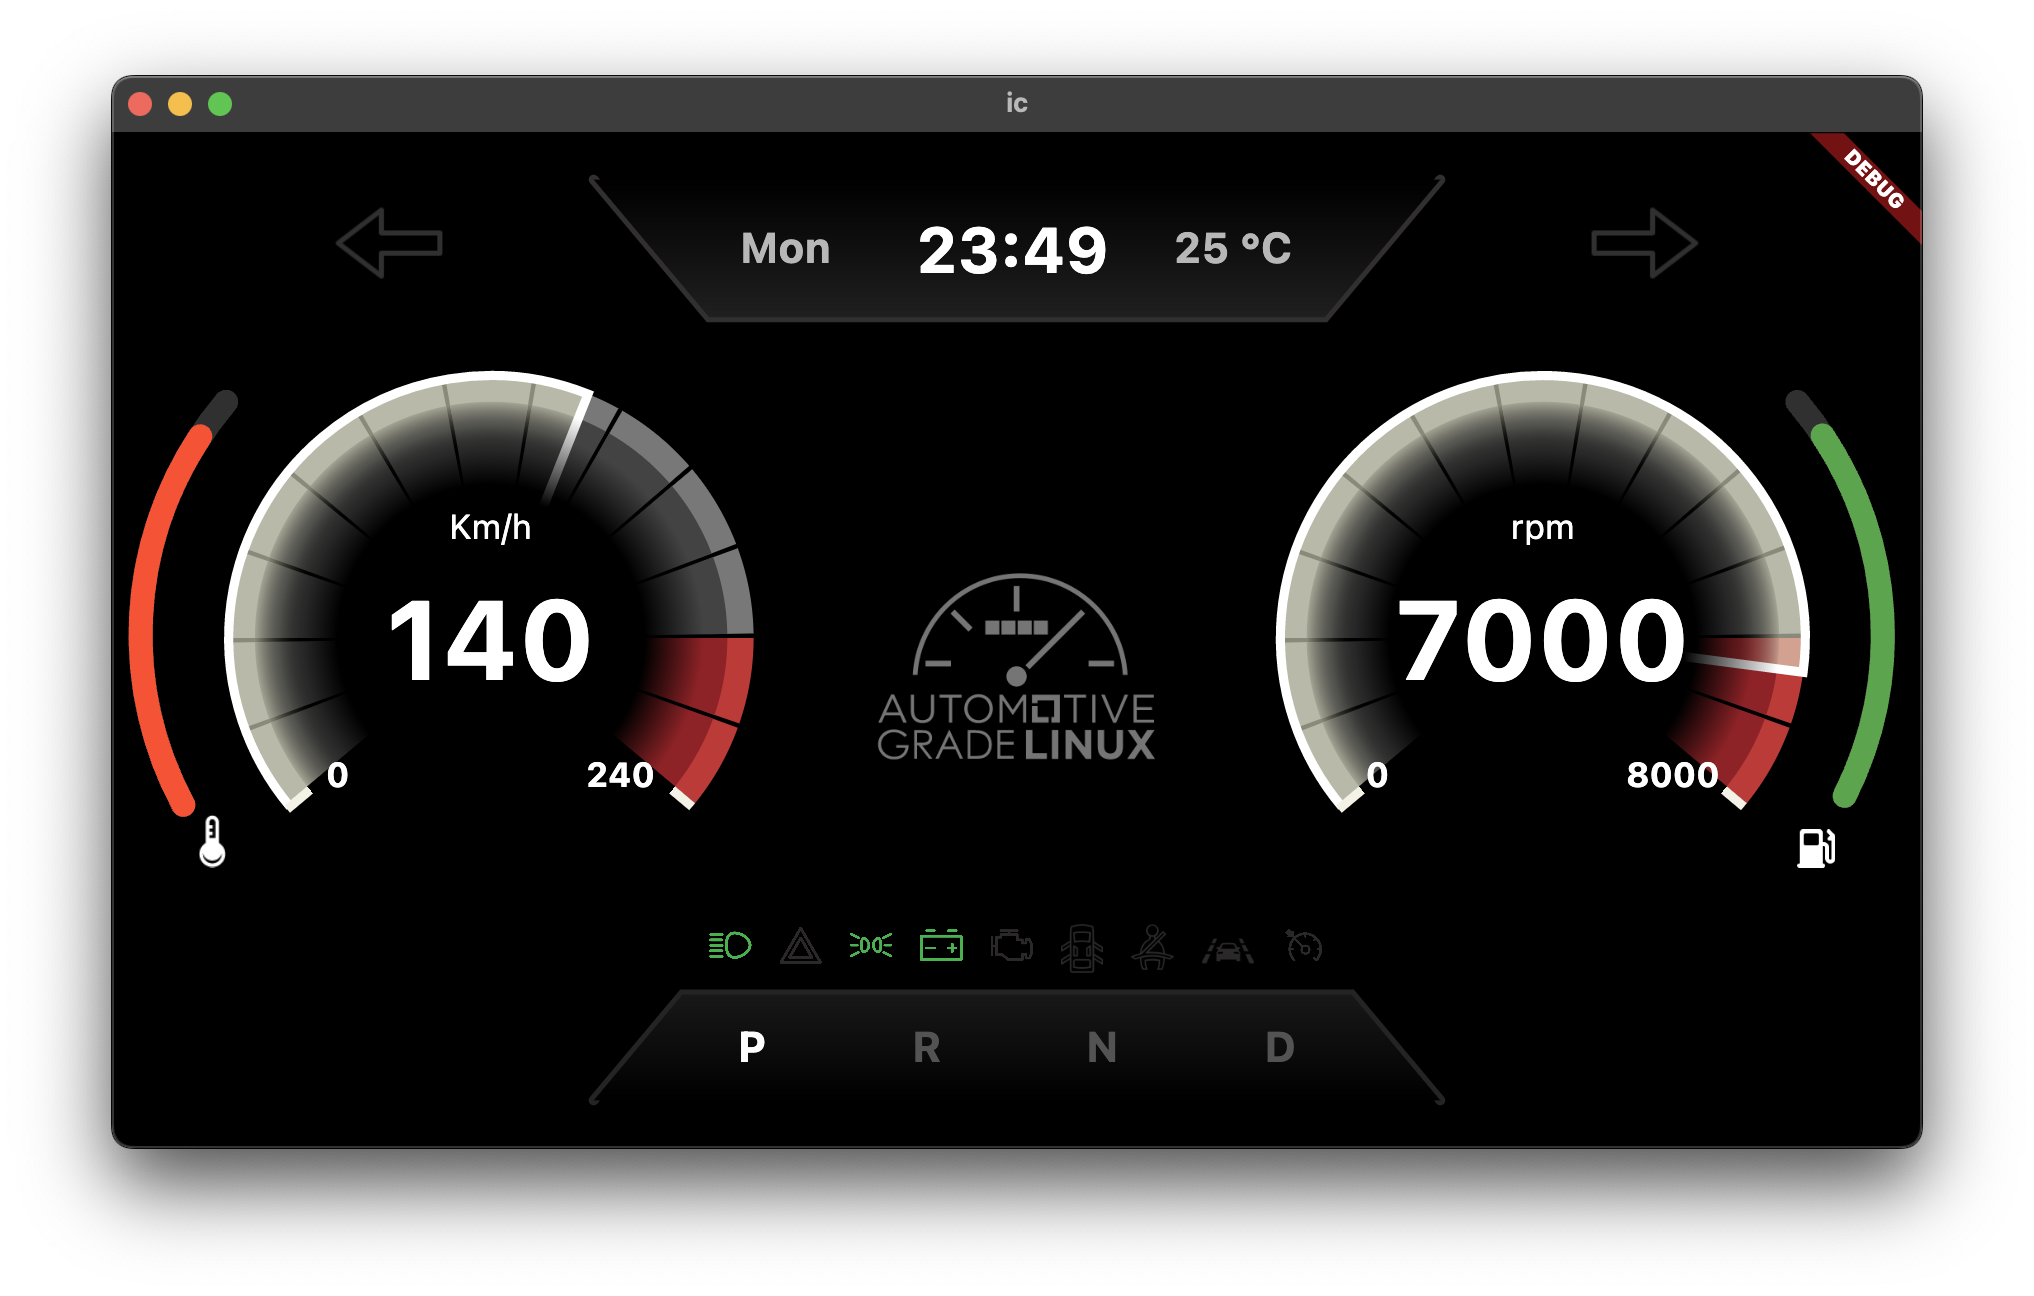 docs/01_Getting_Started/03_Build_and_Boot_guide_Profile/images/flutter_instrument_cluster.png